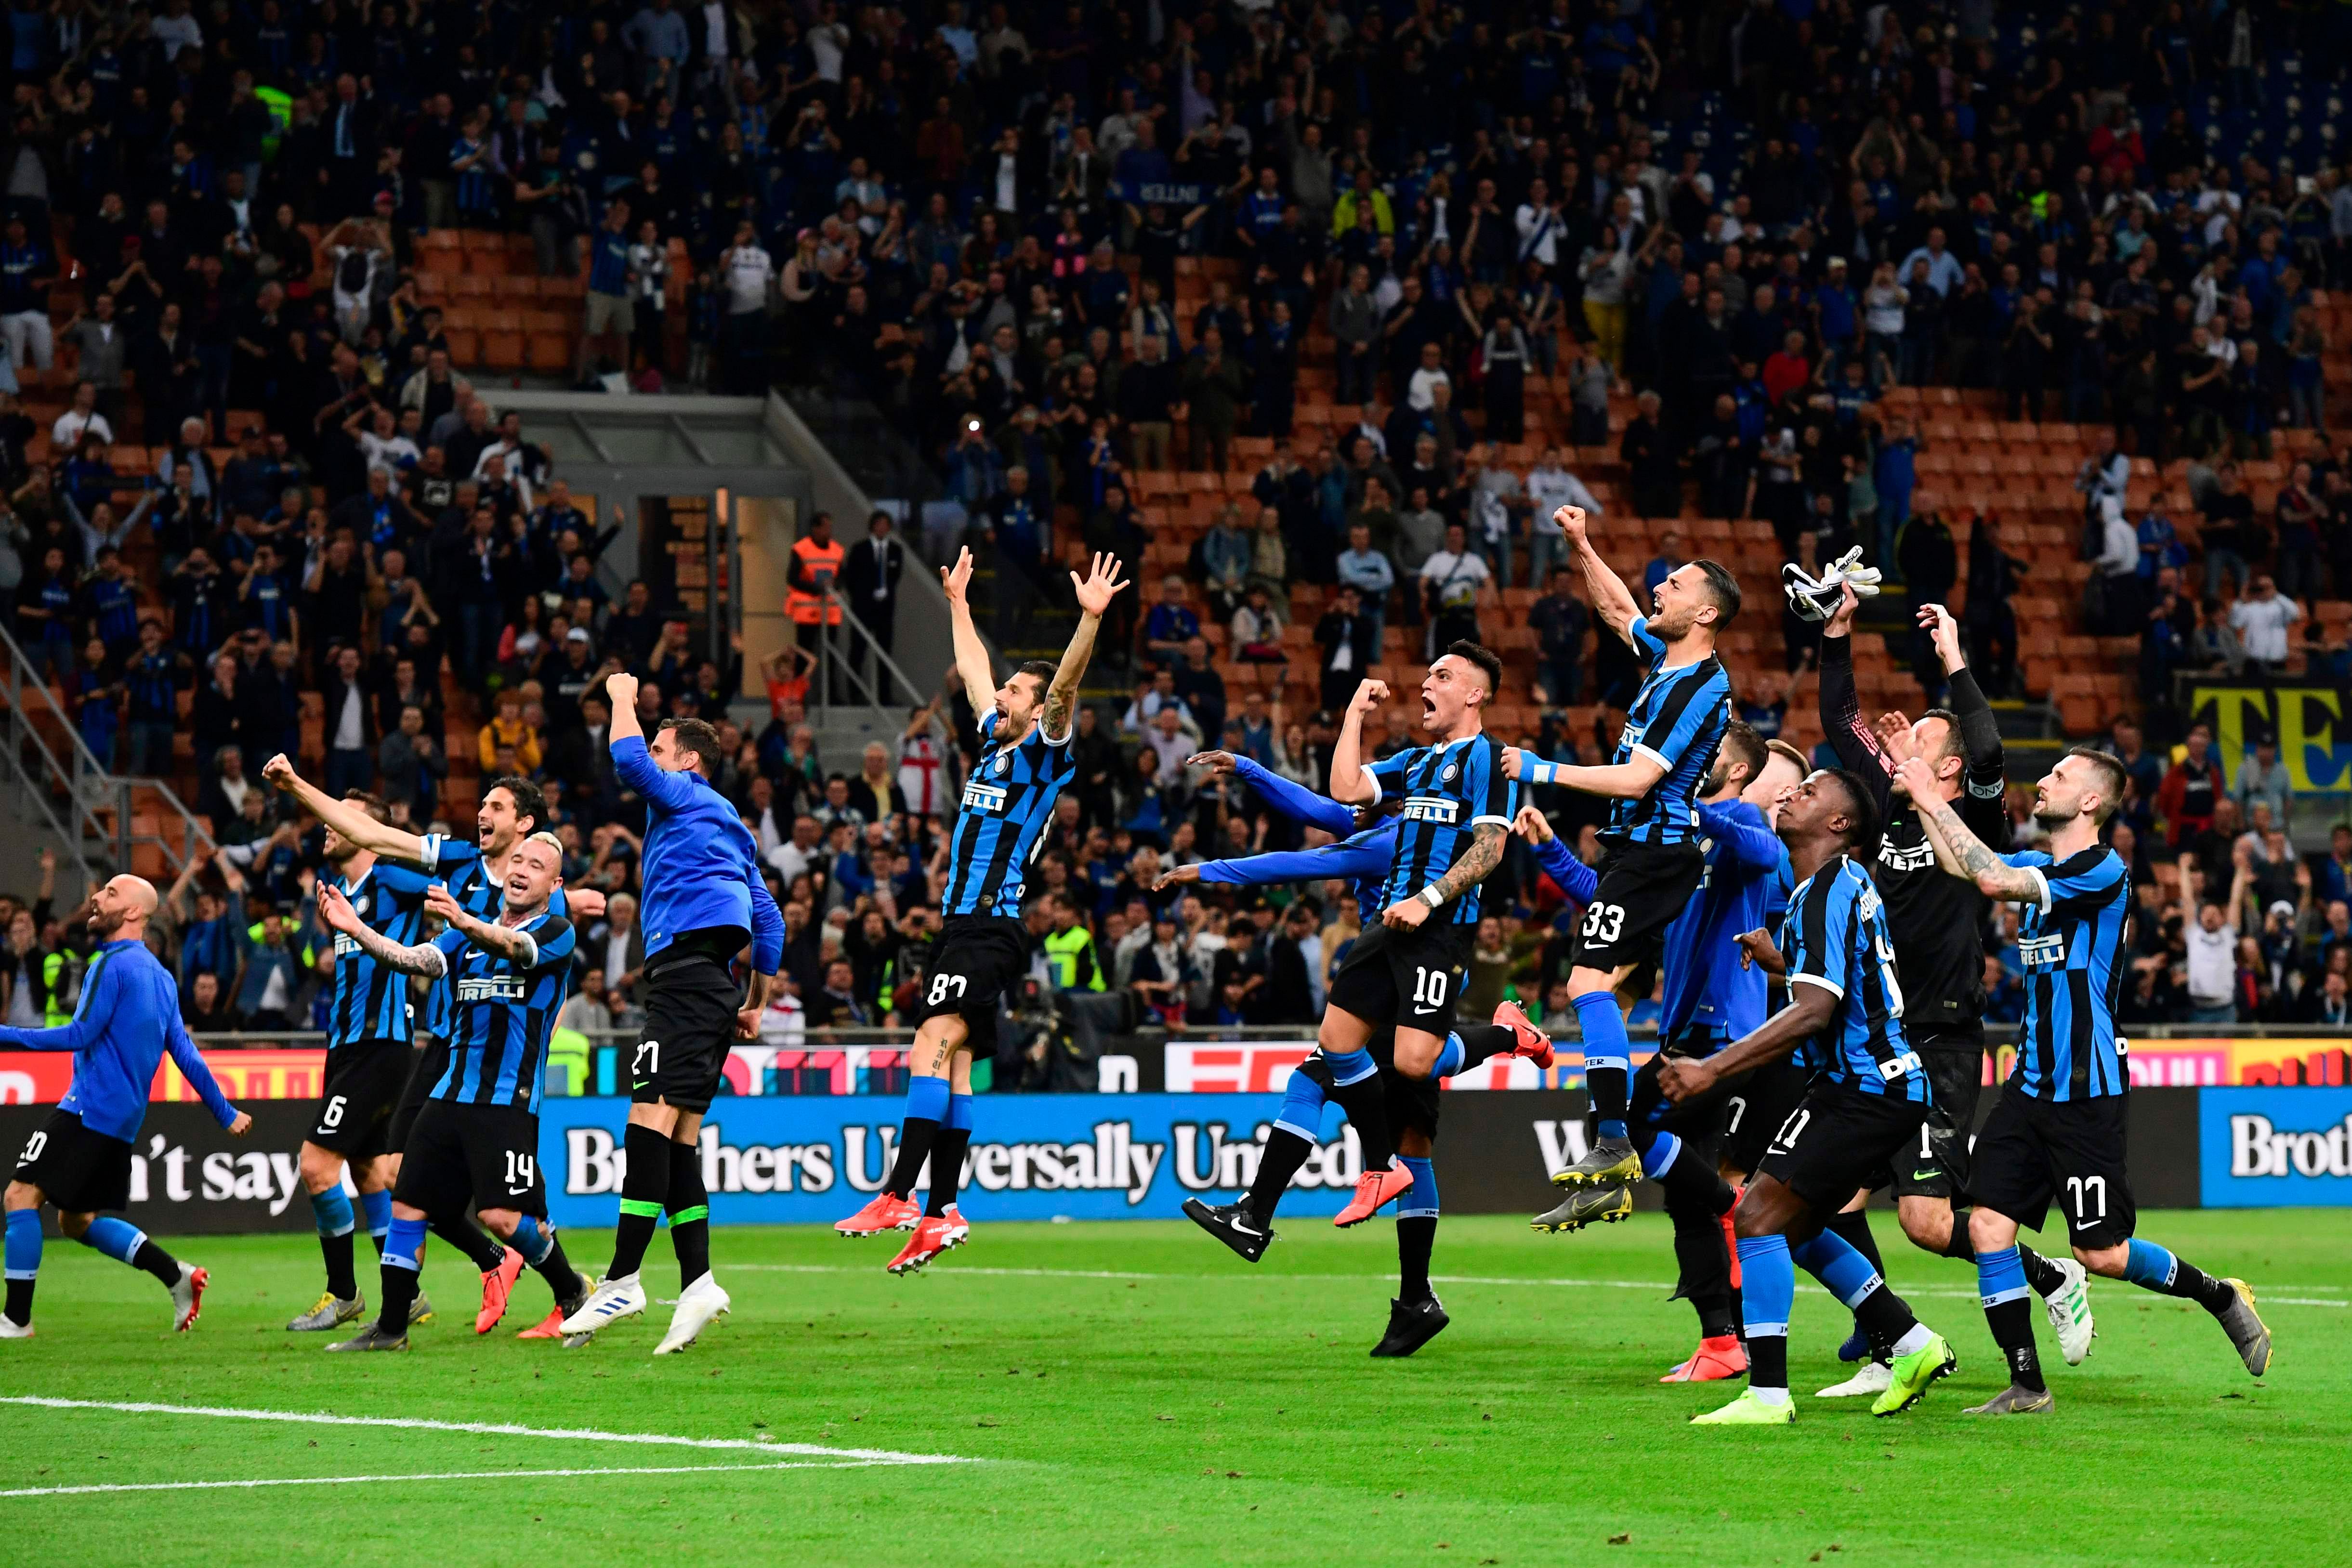 Inter Milan's players celebrate after winning the Italian Serie A football match between Inter Milan and Empoli on May 26, 2019 at the San Siro stadium in Milan. (Photo by AFP)